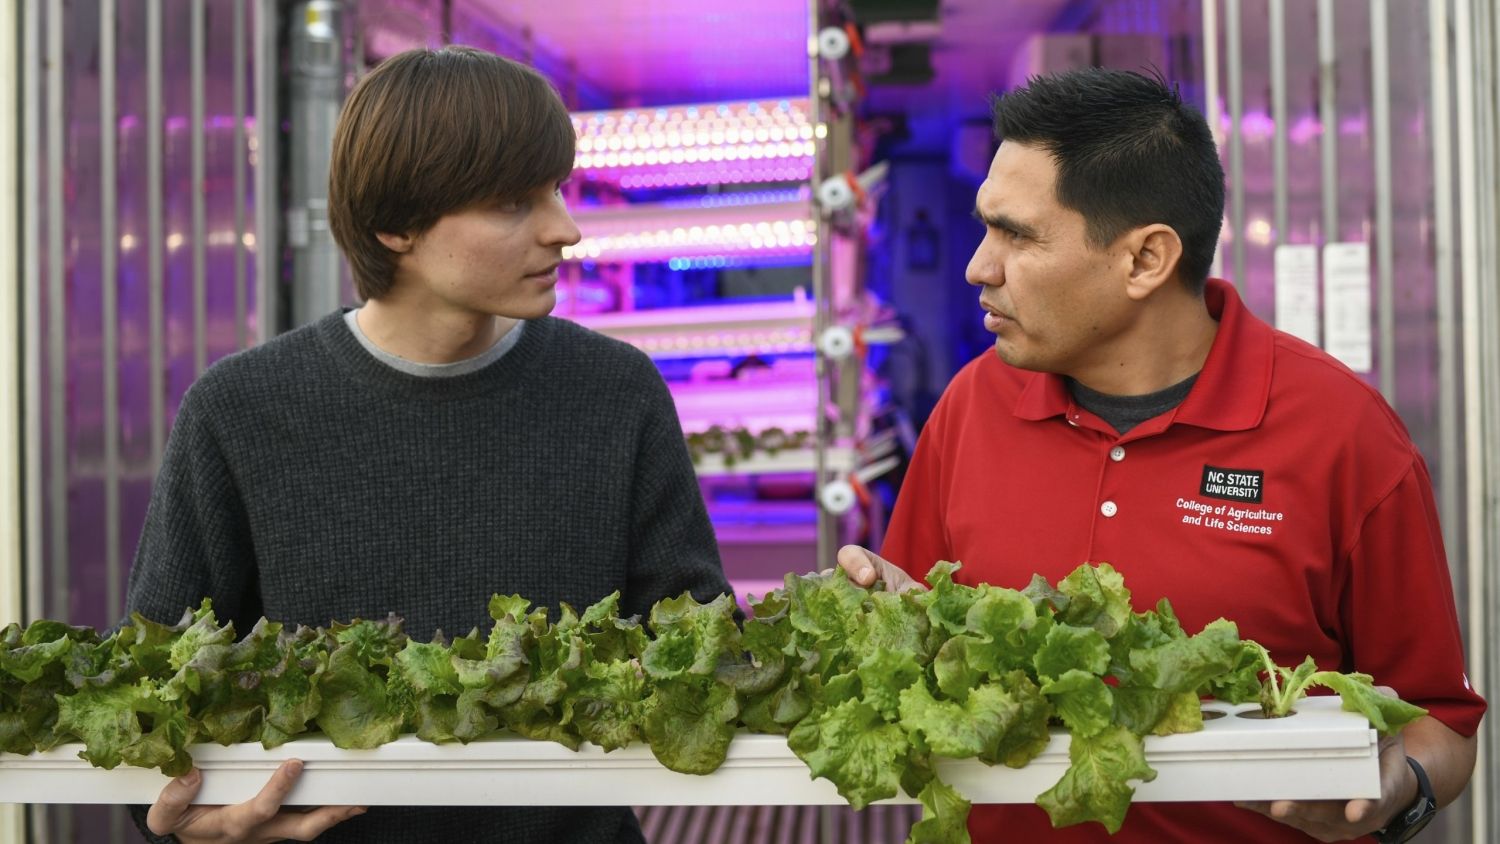 Two men holding a tray of lettuce in front of a shipping container farm lit in purple